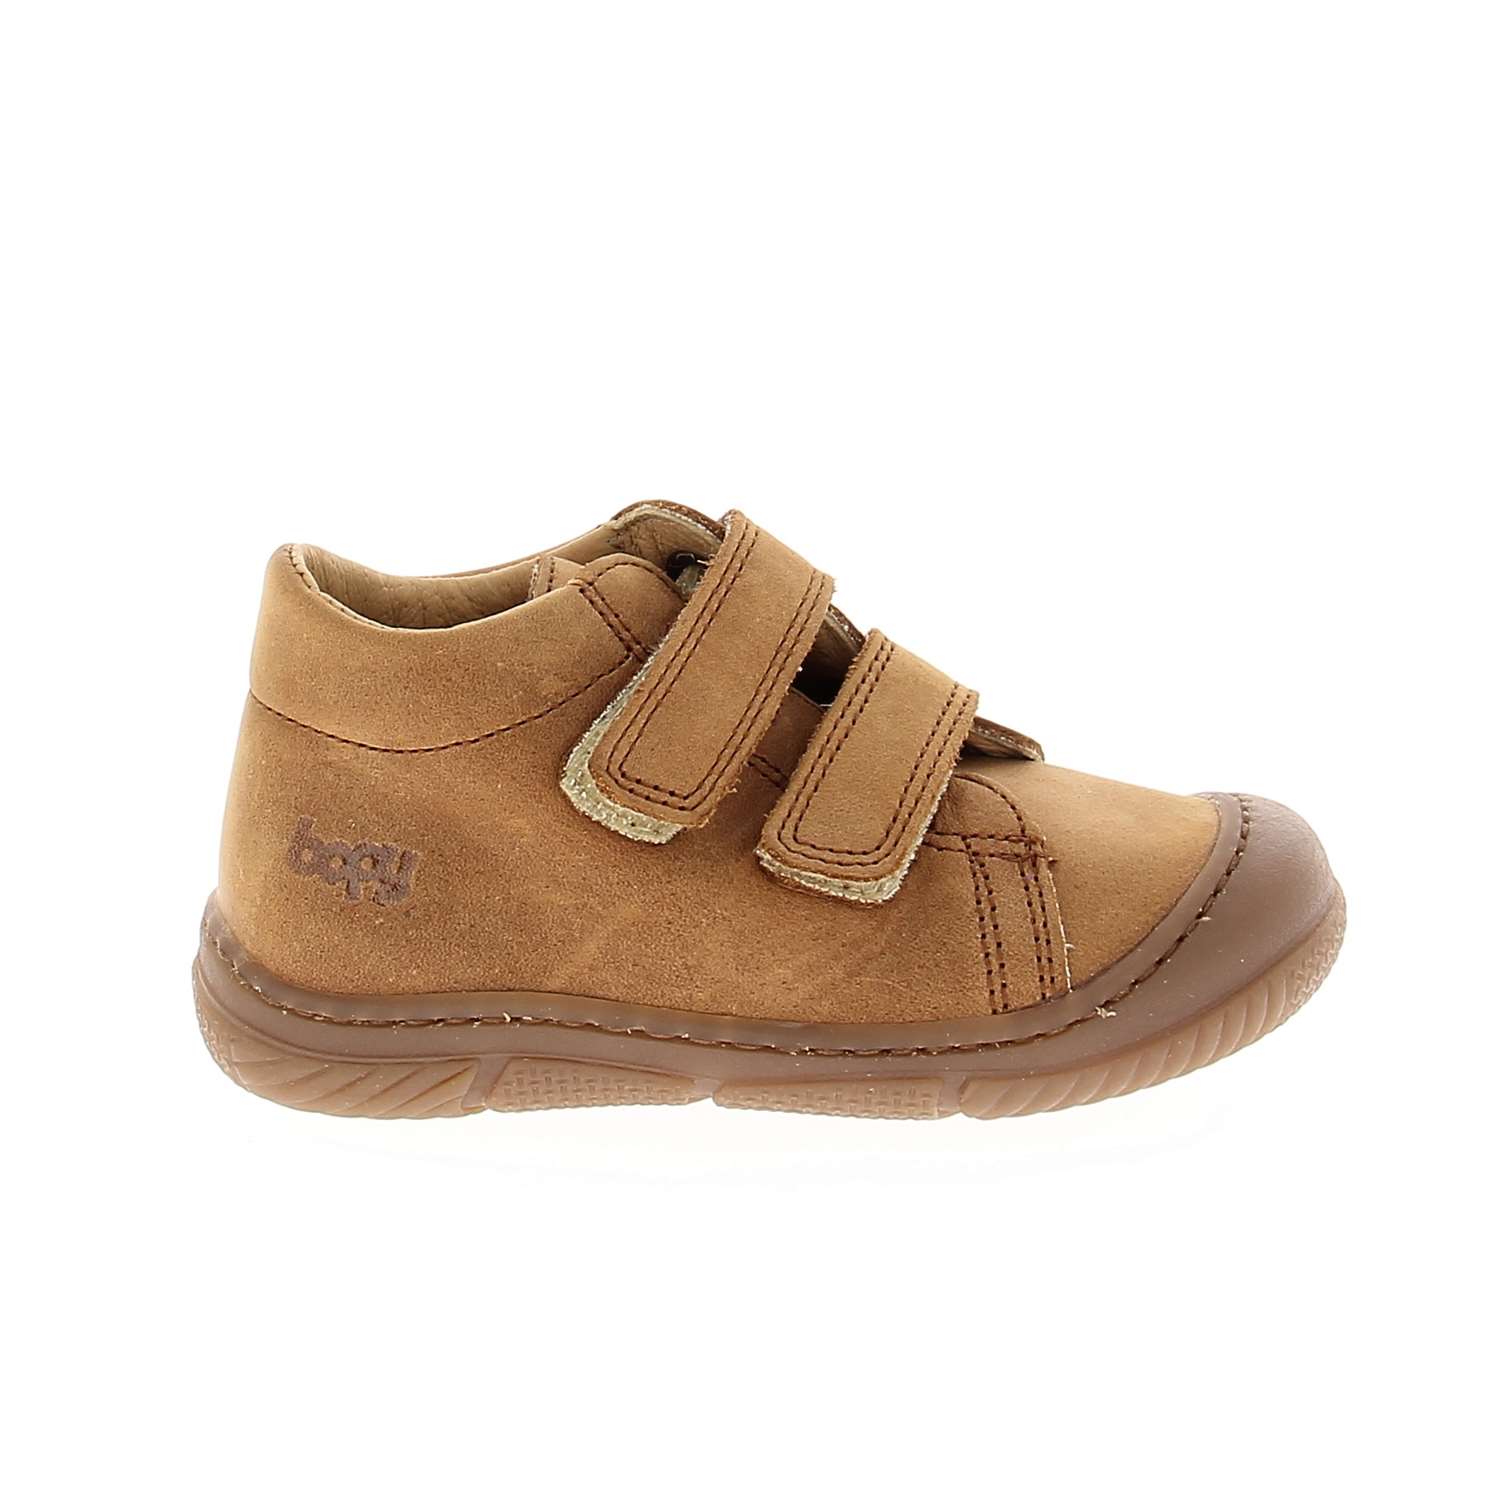 02 - JAMECO - BOPY - Chaussures montantes - Cuir